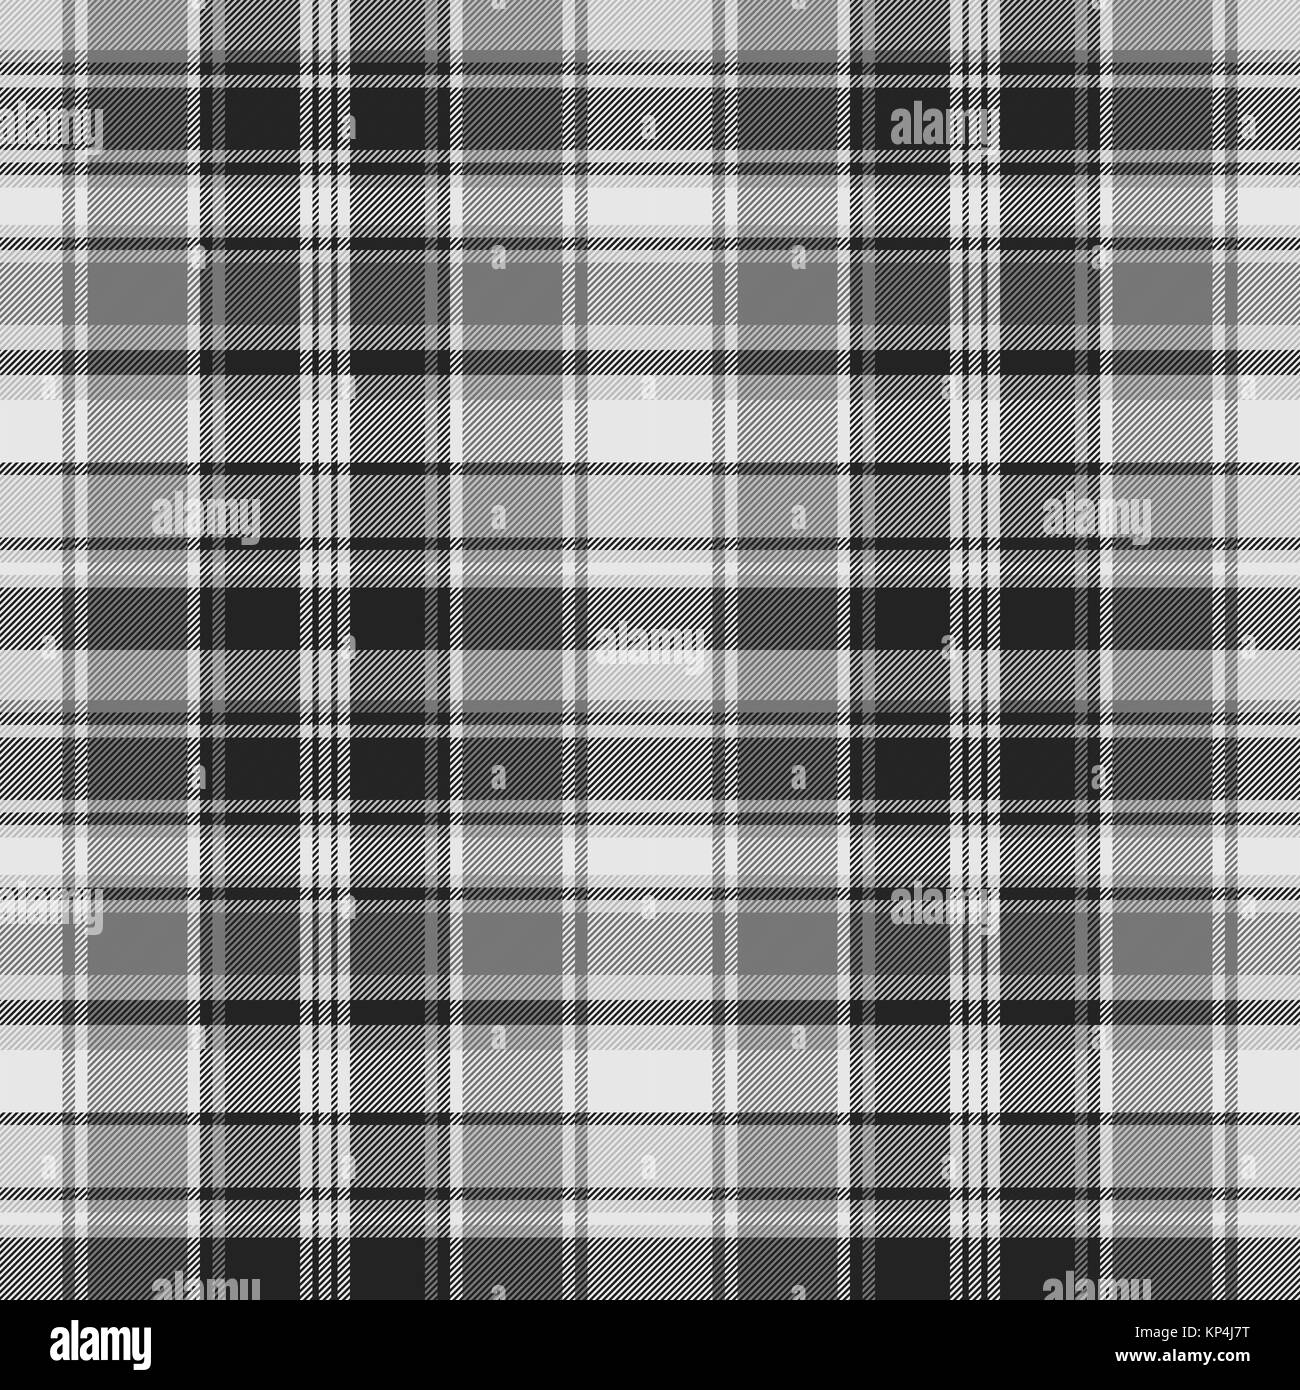 Gray check fabric texture seamless pattern. Vector illustration